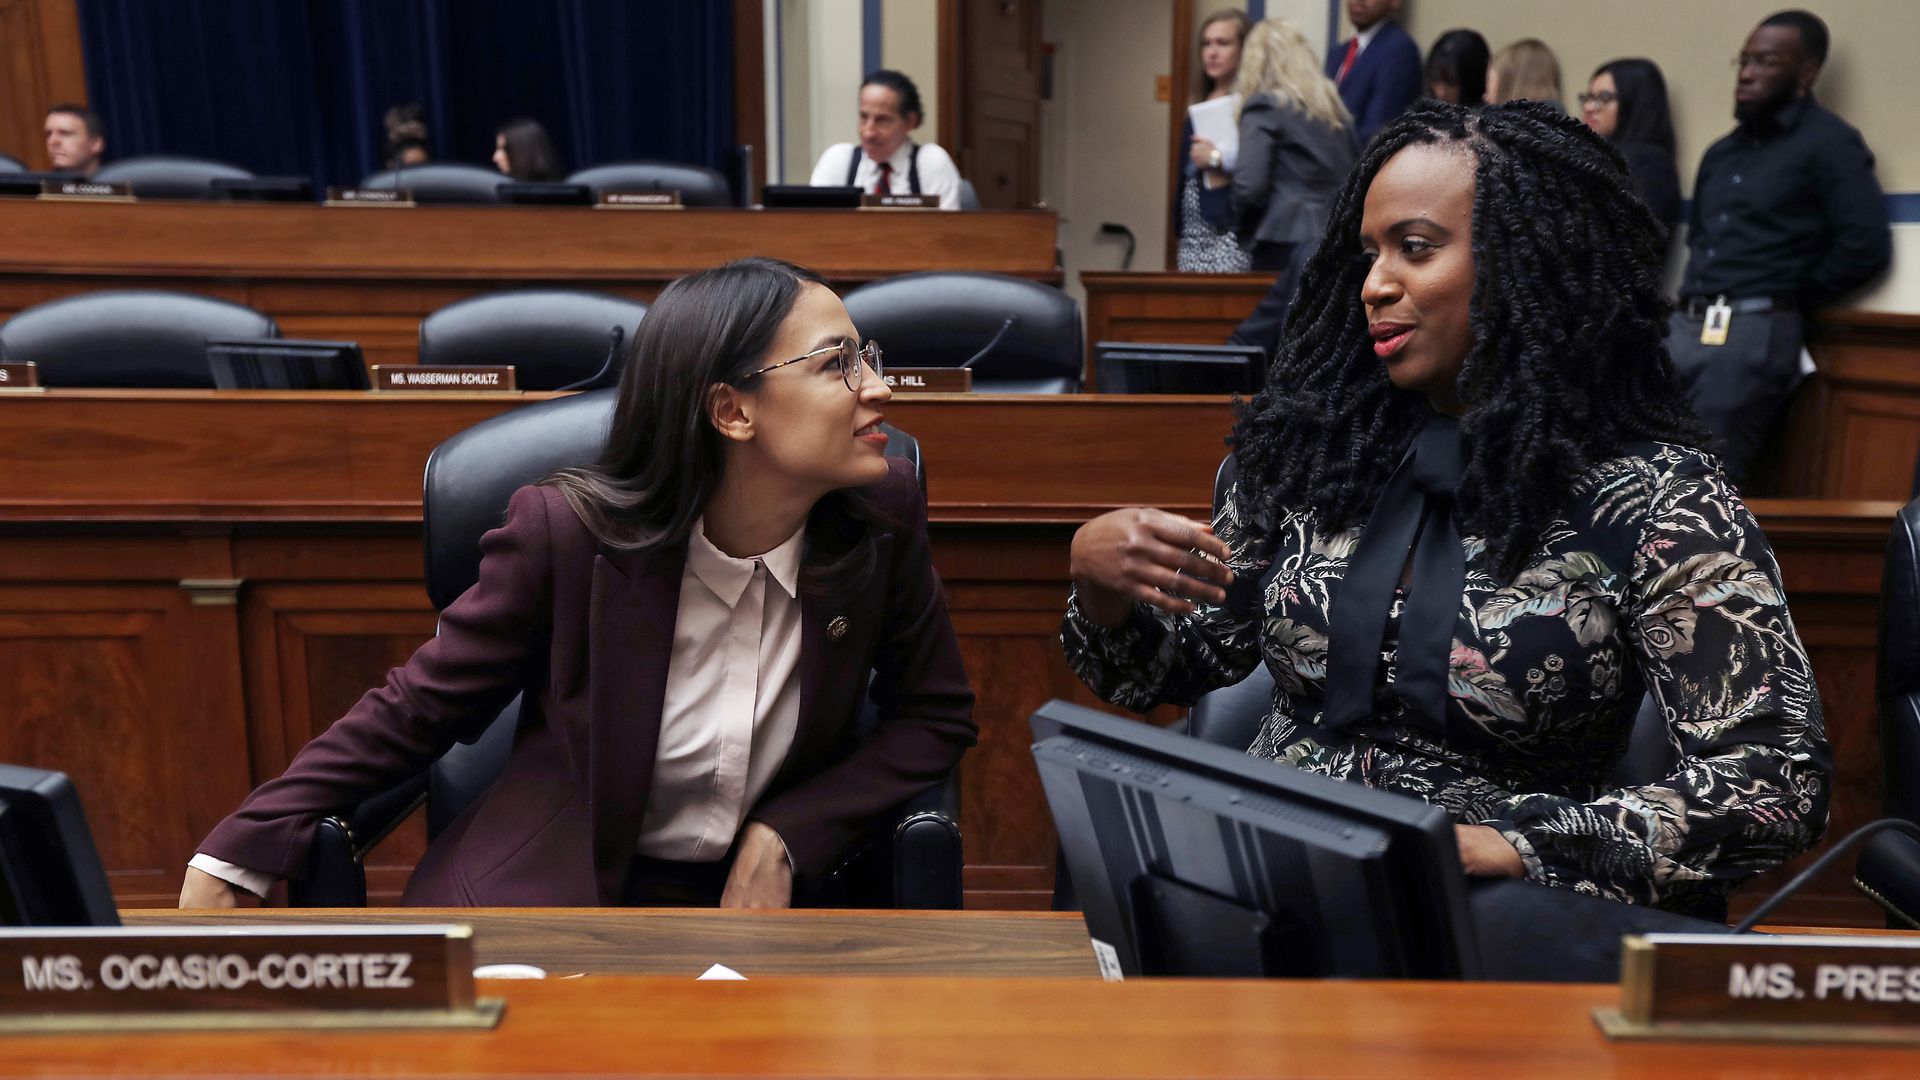 Reps. Alexandria Ocasio-Cortez and Ayanna Pressley are seen speaking during a congressional hearing.